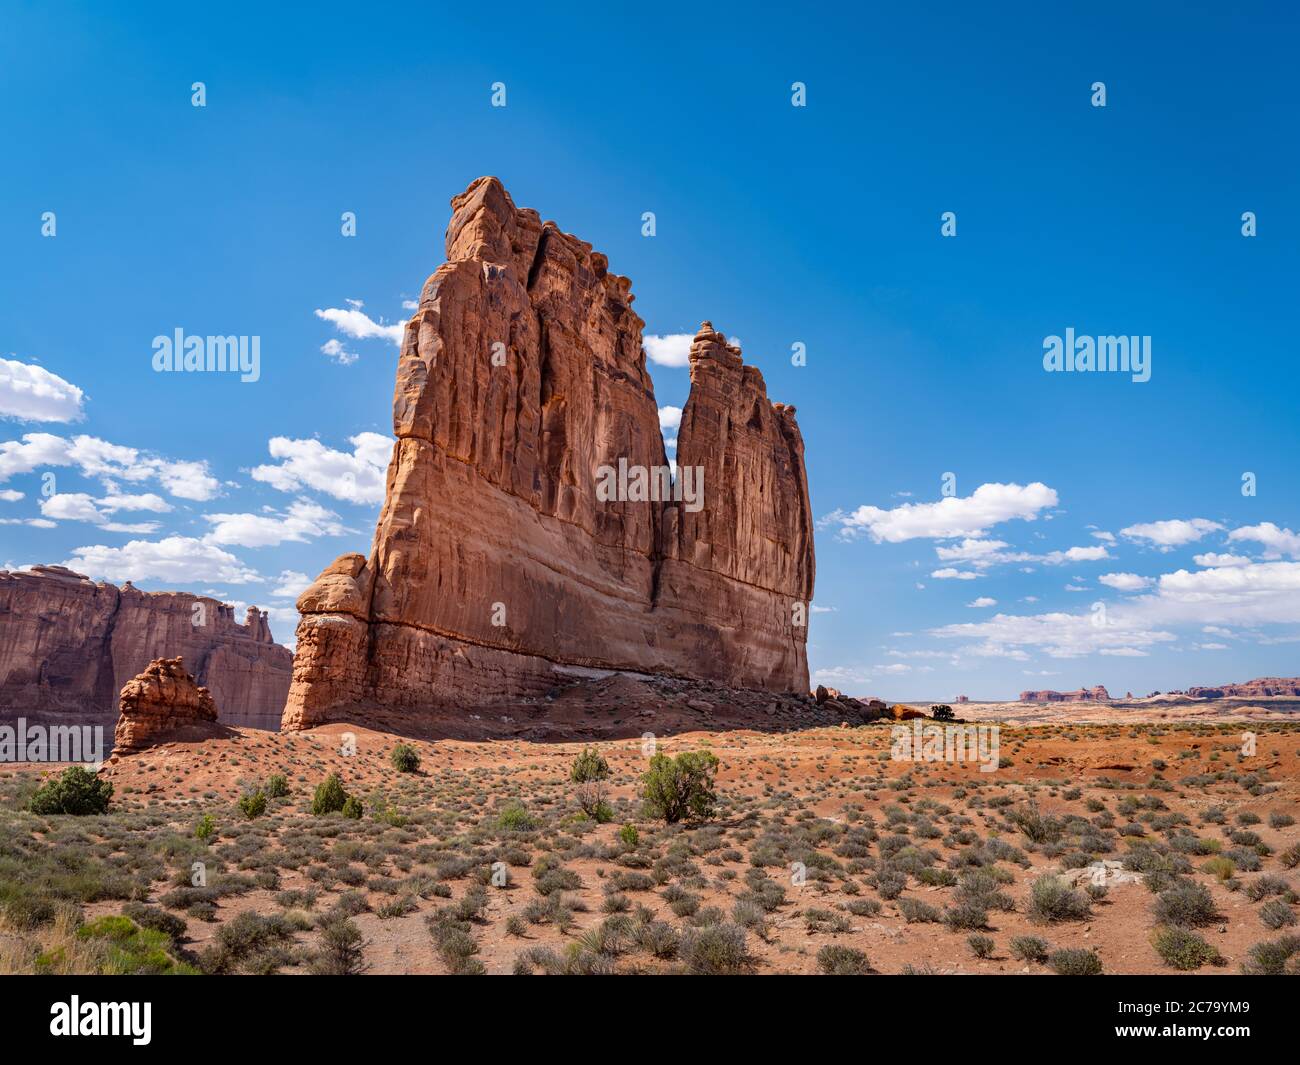 Courthouse Tower, Arches National Park, Utah USA Foto Stock